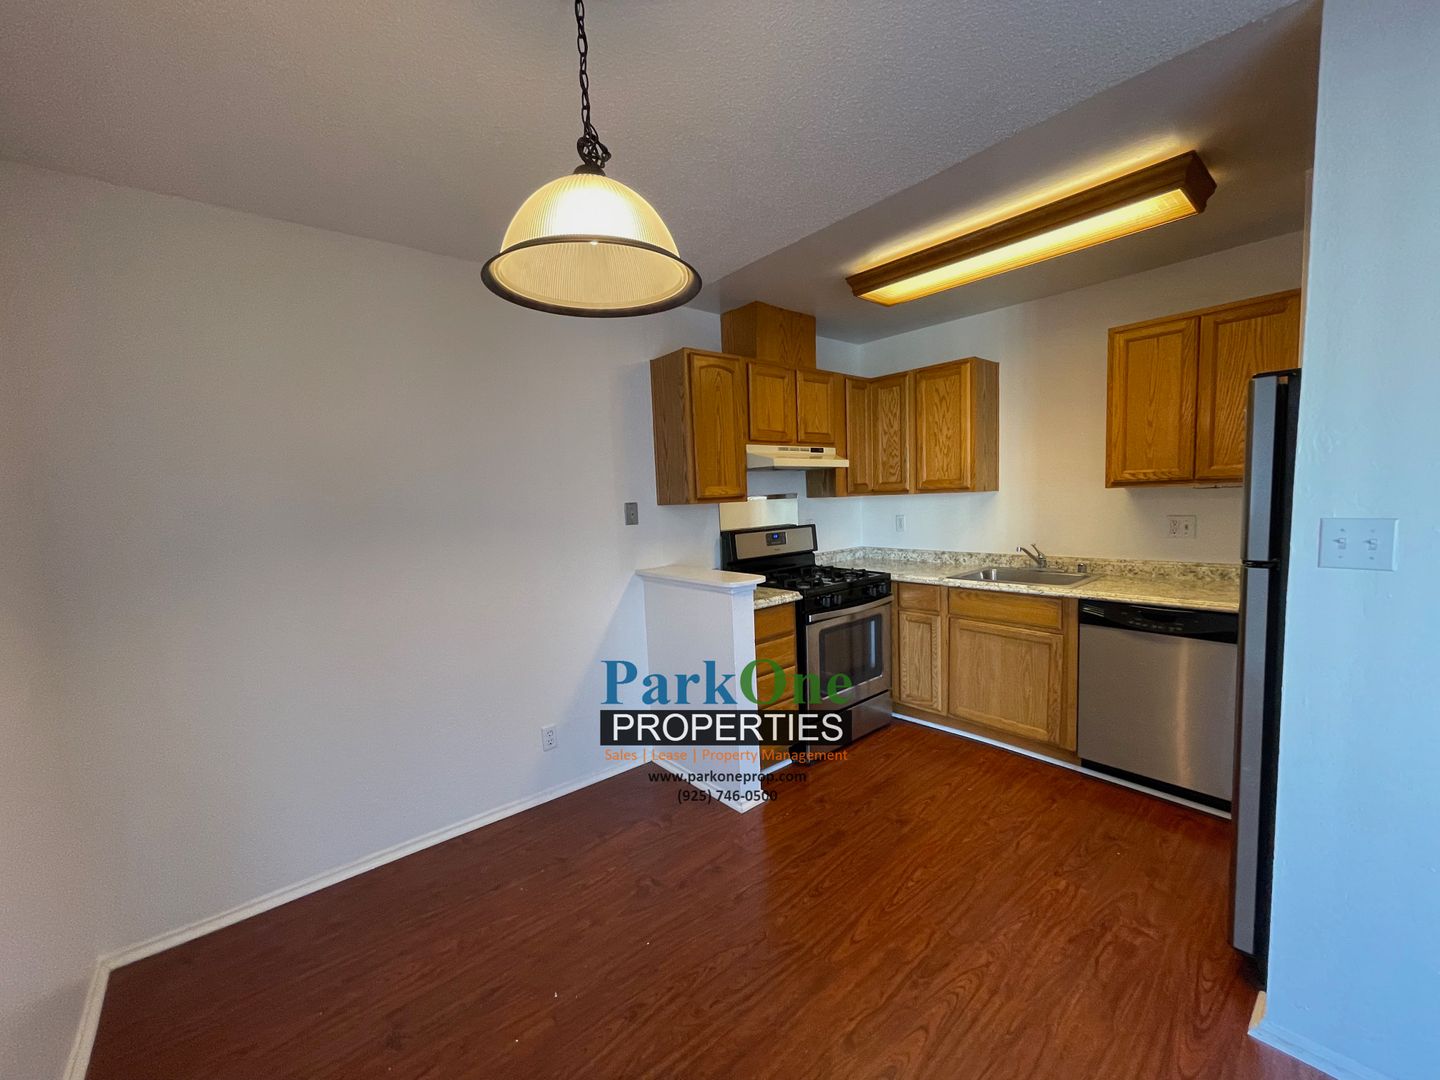 Condo With Garage Parking Available Now!